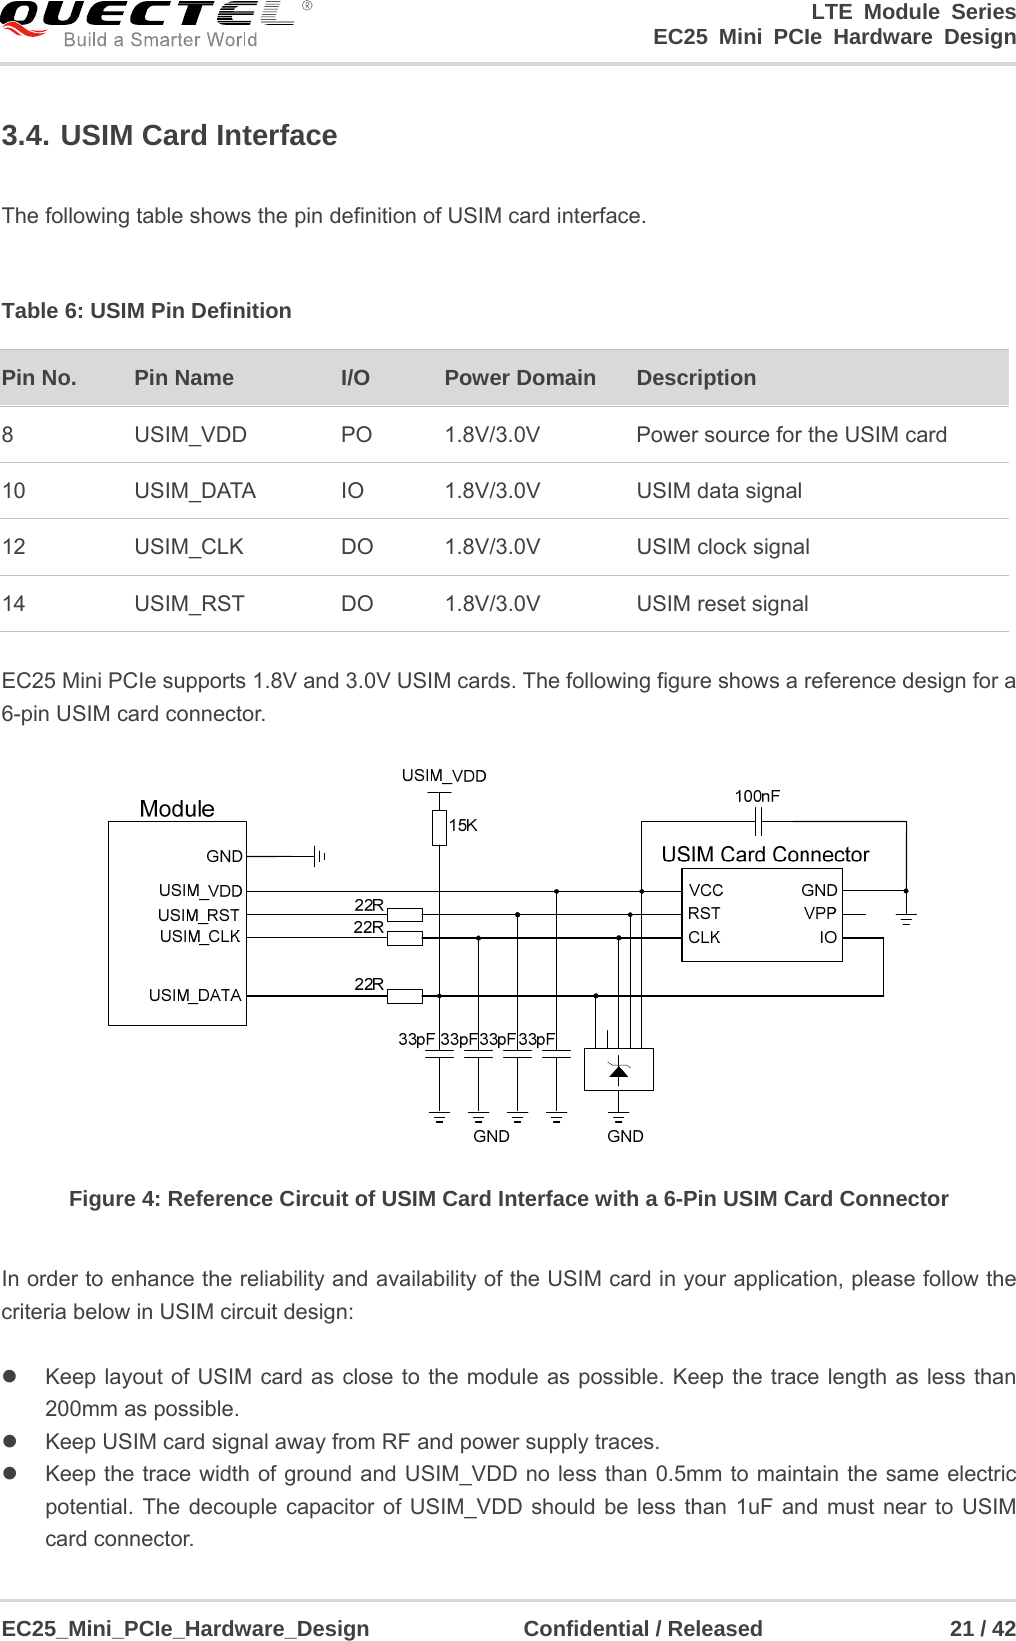                                        LTE Module Series                                                  EC25 Mini PCIe Hardware Design  EC25_Mini_PCIe_Hardware_Design              Confidential / Released                 21 / 42    3.4. USIM Card Interface  The following table shows the pin definition of USIM card interface.  Table 6: USIM Pin Definition  EC25 Mini PCIe supports 1.8V and 3.0V USIM cards. The following figure shows a reference design for a 6-pin USIM card connector.  Figure 4: Reference Circuit of USIM Card Interface with a 6-Pin USIM Card Connector  In order to enhance the reliability and availability of the USIM card in your application, please follow the criteria below in USIM circuit design:    Keep layout of USIM card as close to the module as possible. Keep the trace length as less than 200mm as possible.     Keep USIM card signal away from RF and power supply traces.   Keep the trace width of ground and USIM_VDD no less than 0.5mm to maintain the same electric potential. The decouple capacitor of USIM_VDD should be less than 1uF and must near to USIM card connector. Pin No.  Pin Name I/O  Power Domain    Description 8 USIM_VDD PO       1.8V/3.0V         Power source for the USIM card 10 USIM_DATA IO 1.8V/3.0V USIM data signal 12 USIM_CLK DO 1.8V/3.0V USIM clock signal 14 USIM_RST DO       1.8V/3.0V USIM reset signal 